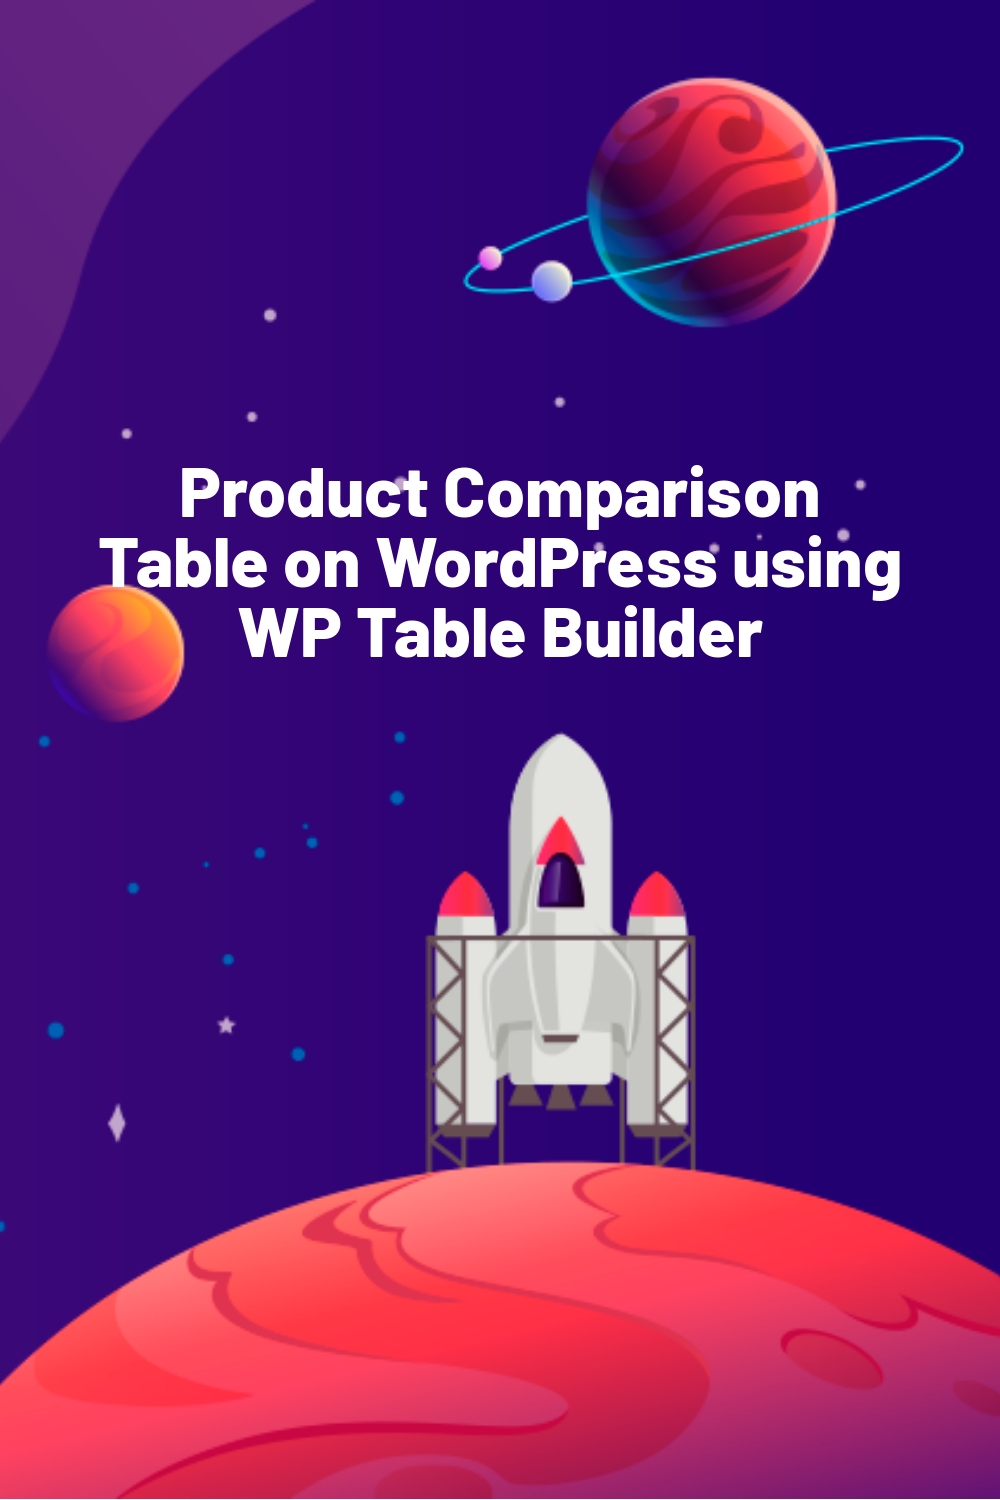 Product Comparison Table on WordPress using WP Table Builder